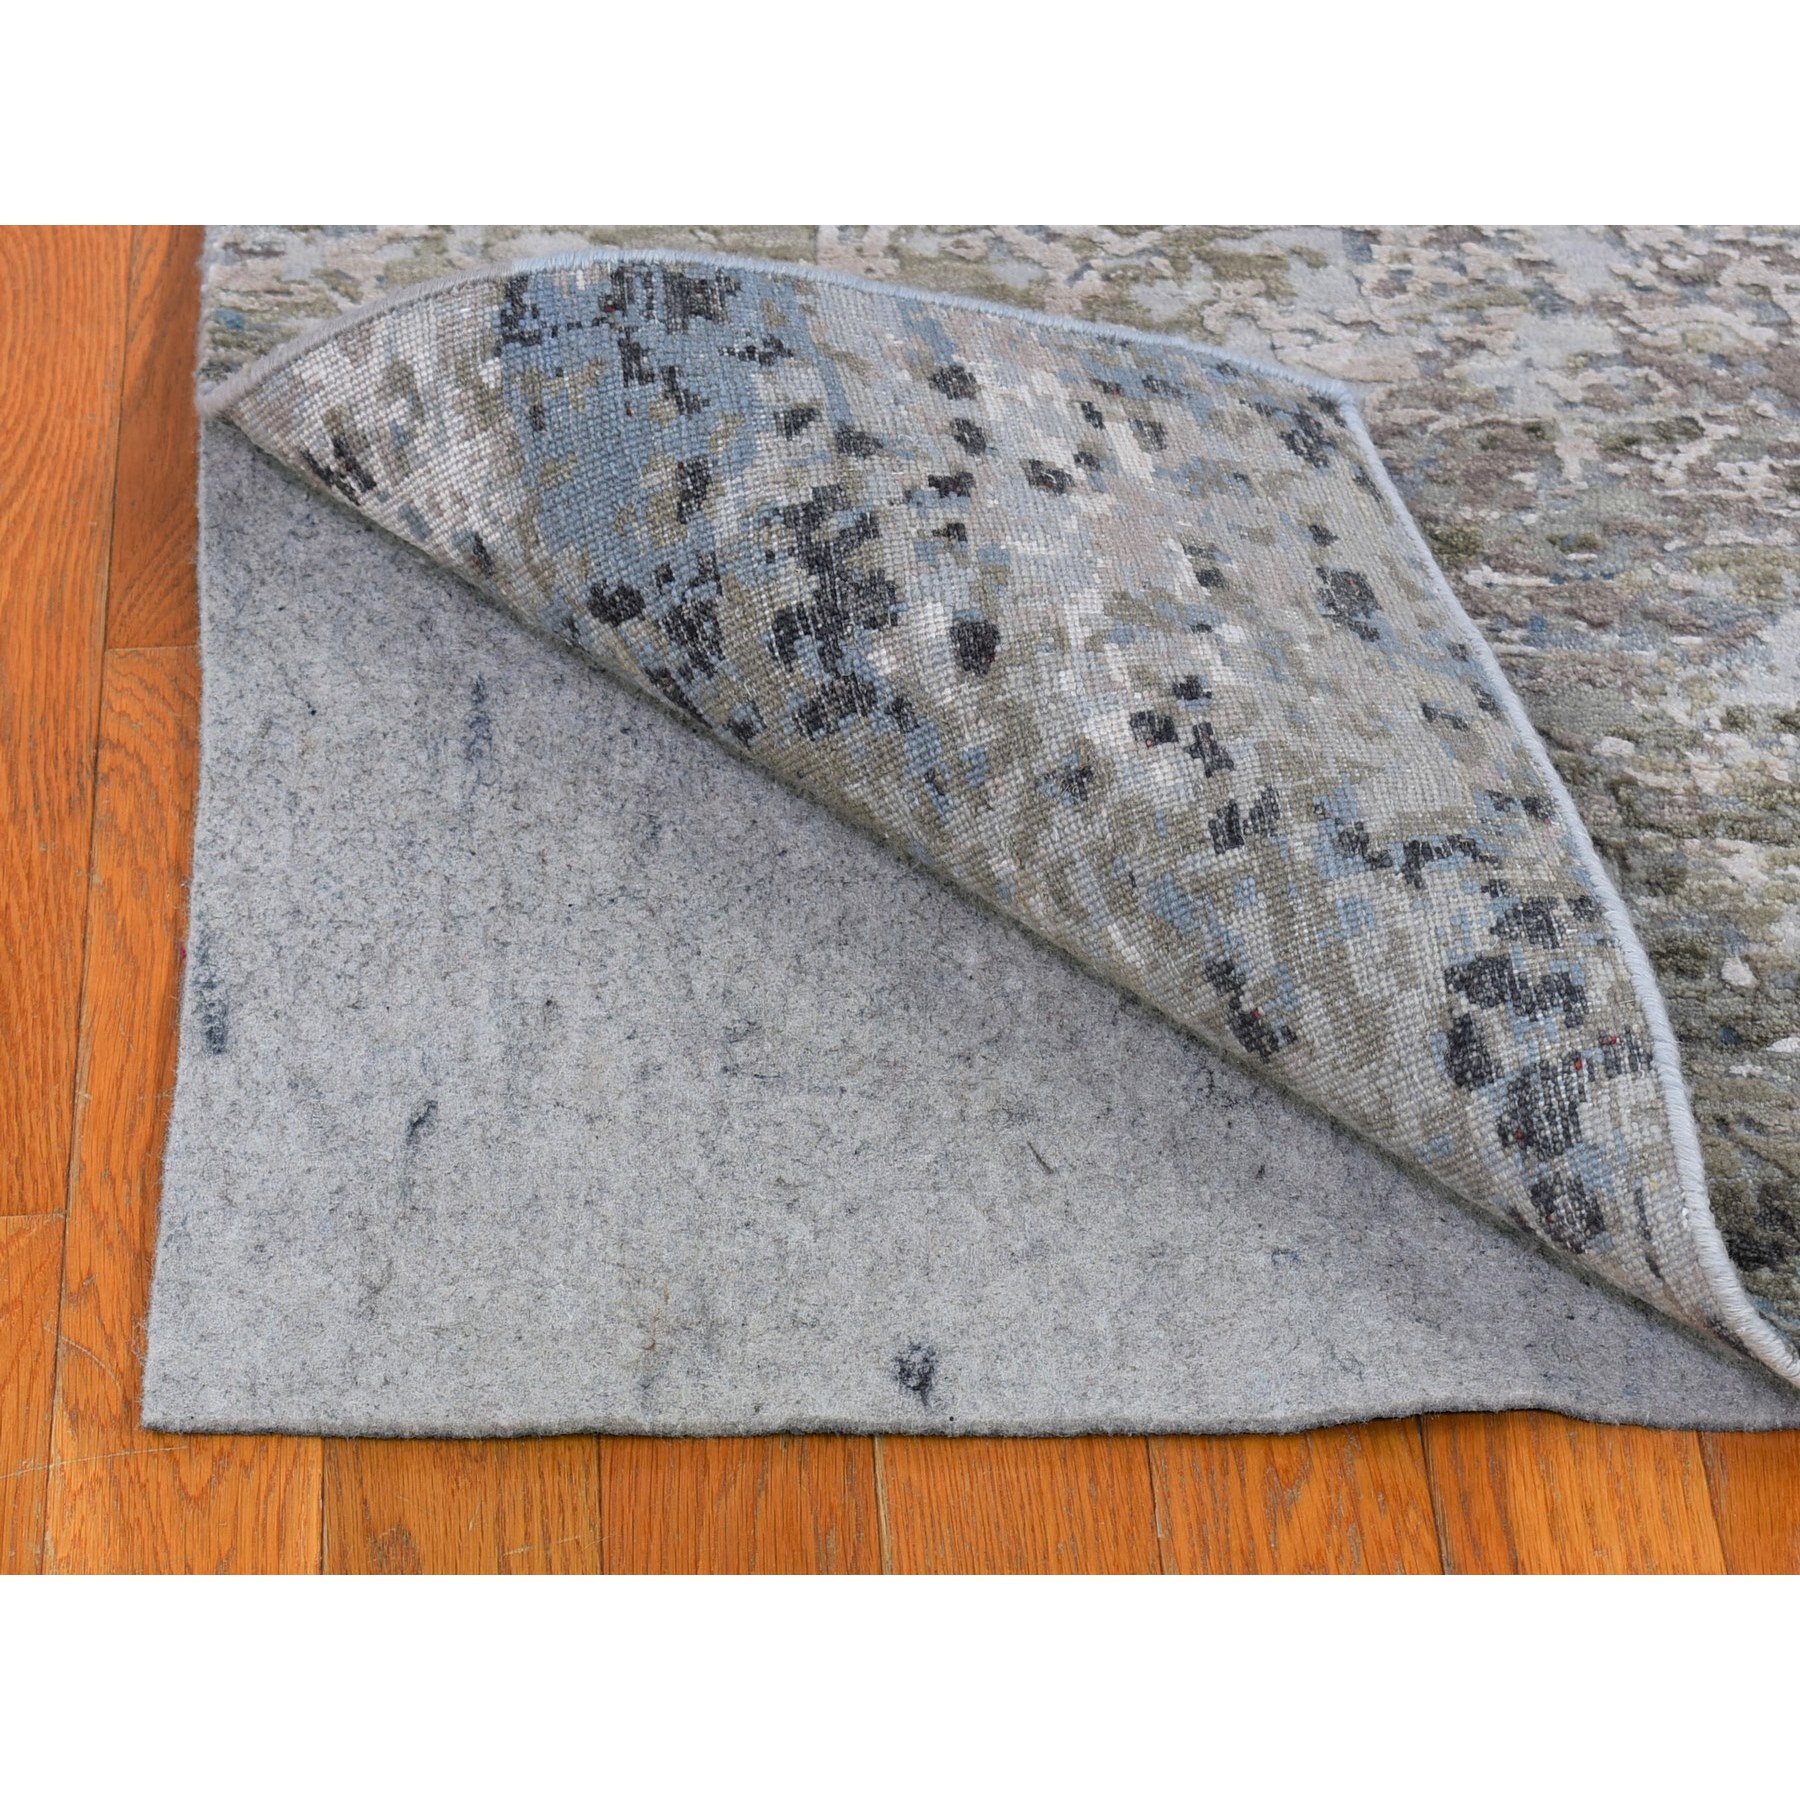 2'6"x10'6" Abstract Design Wool and Silk Hi-Low Pile Gray Denser Weave Hand Woven Runner Oriental Rug 